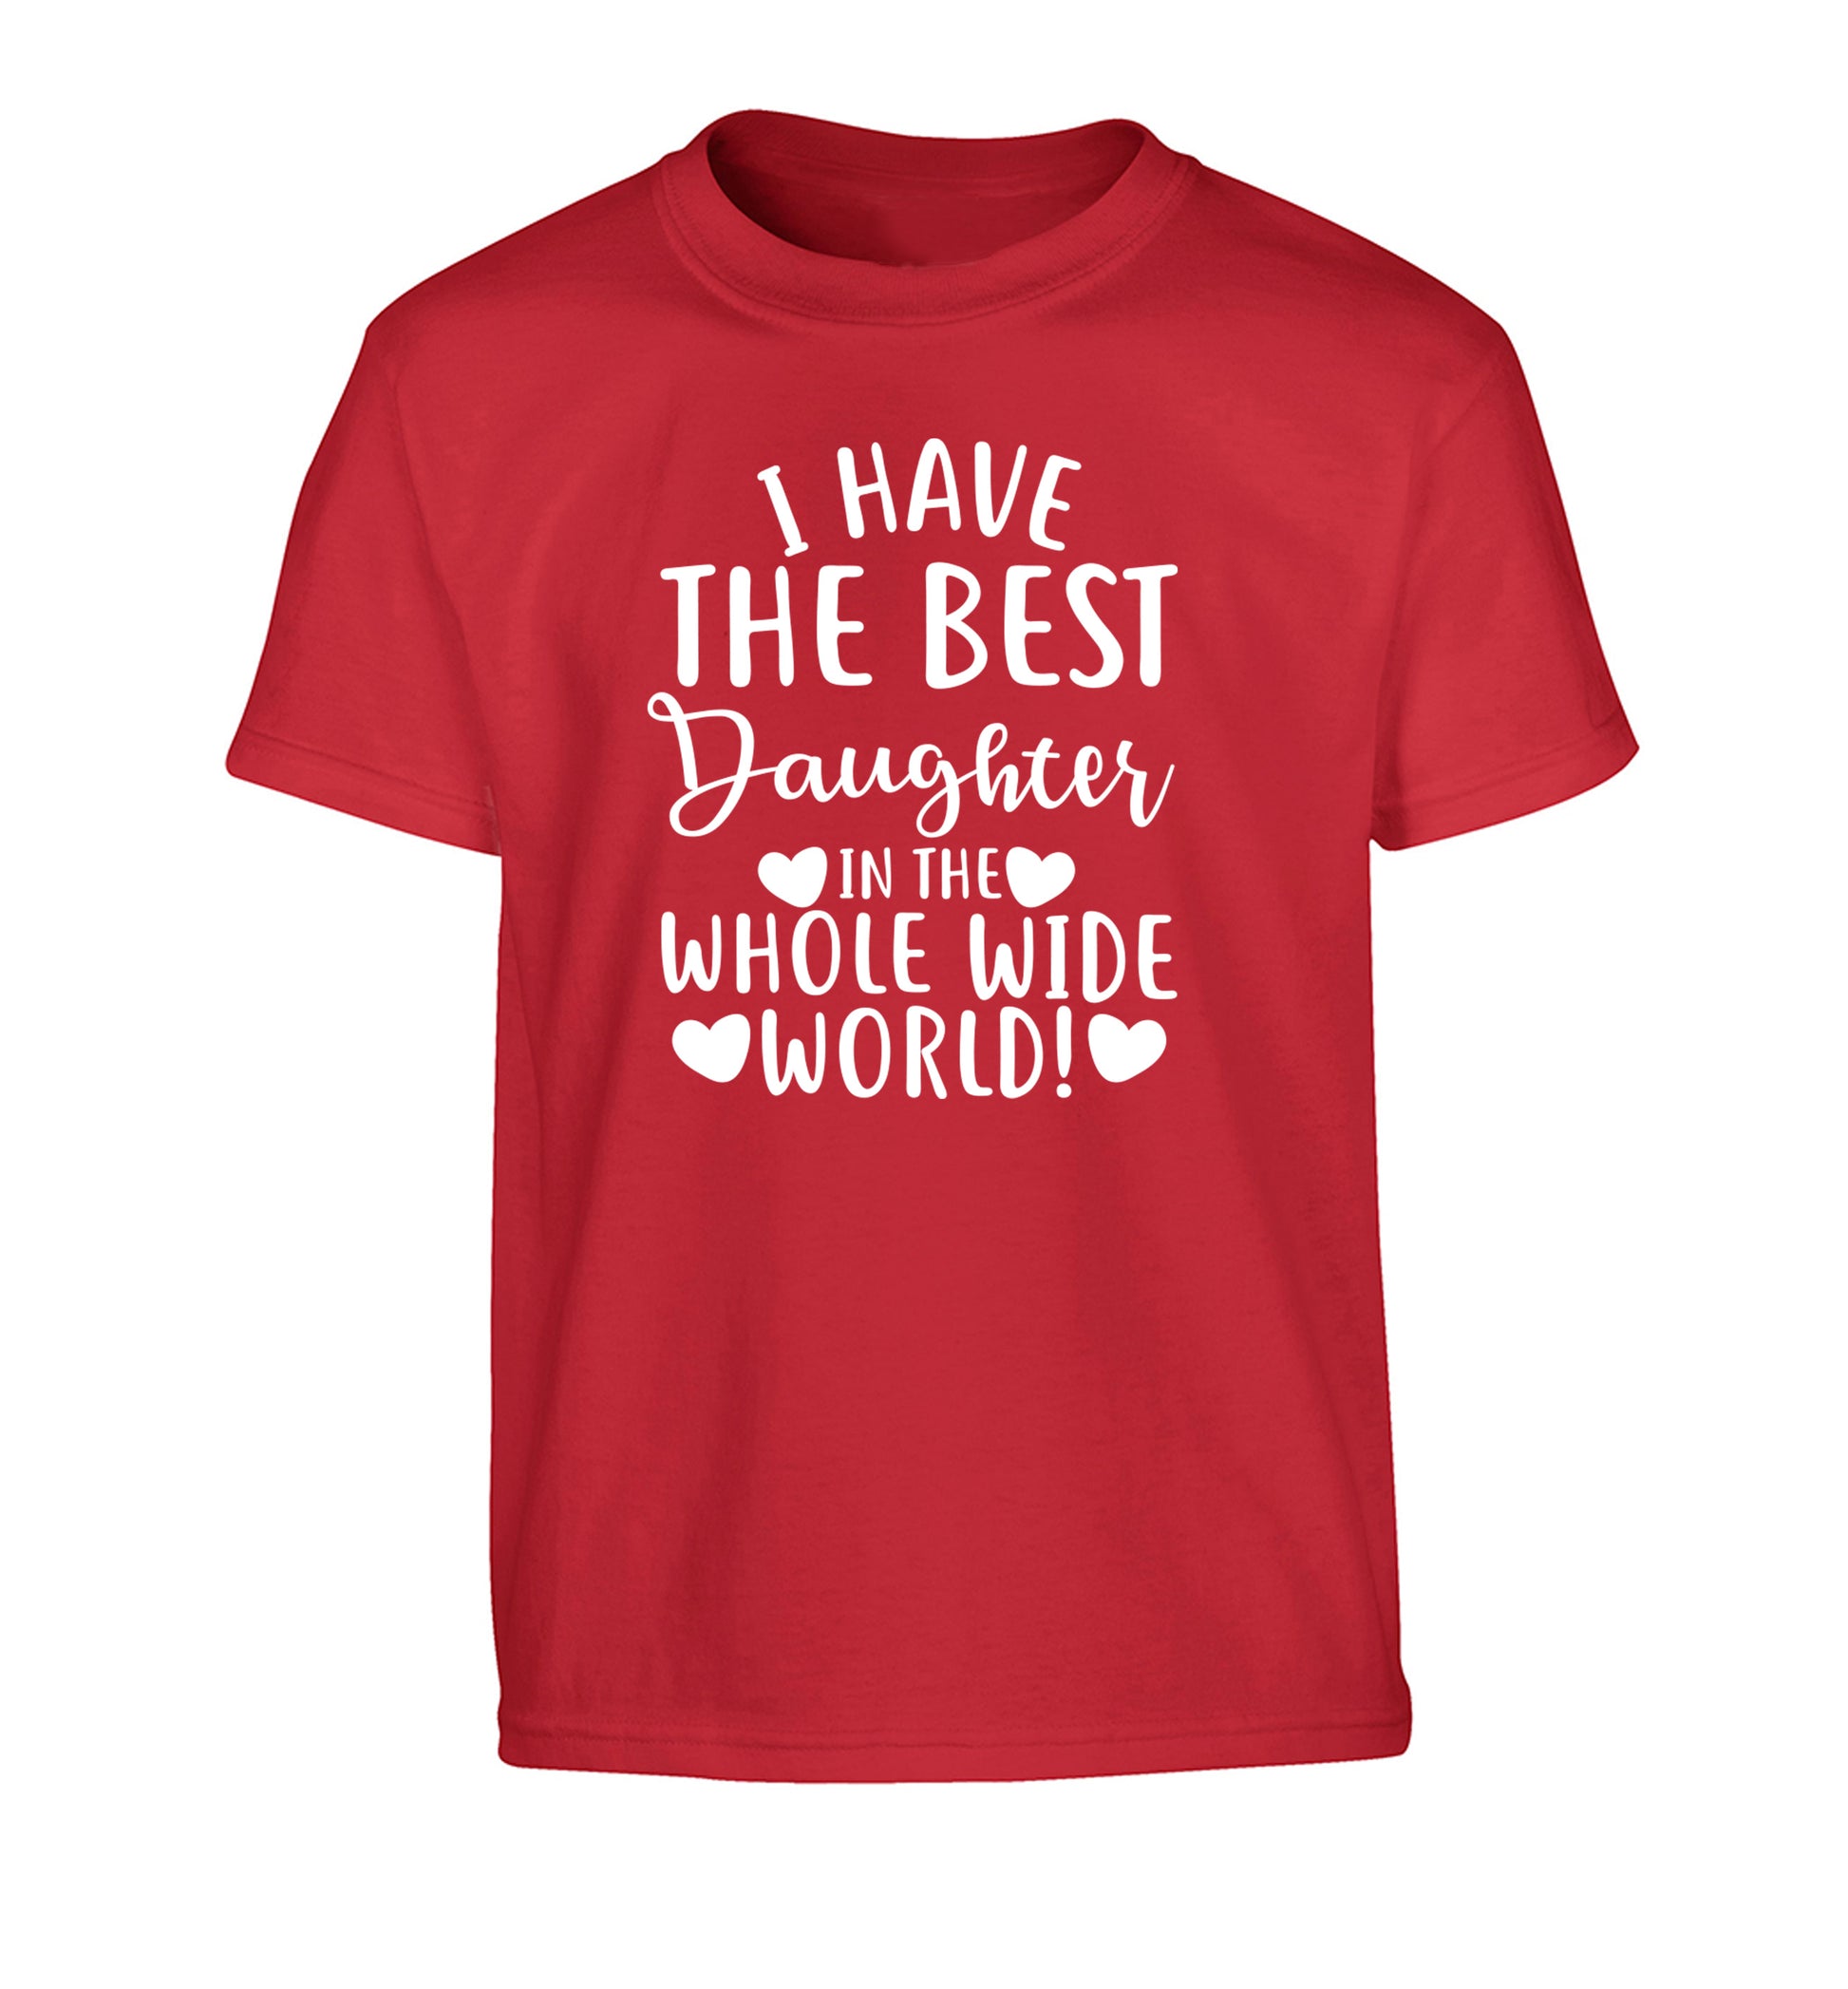 I have the best daughter in the whole wide world! Children's red Tshirt 12-13 Years